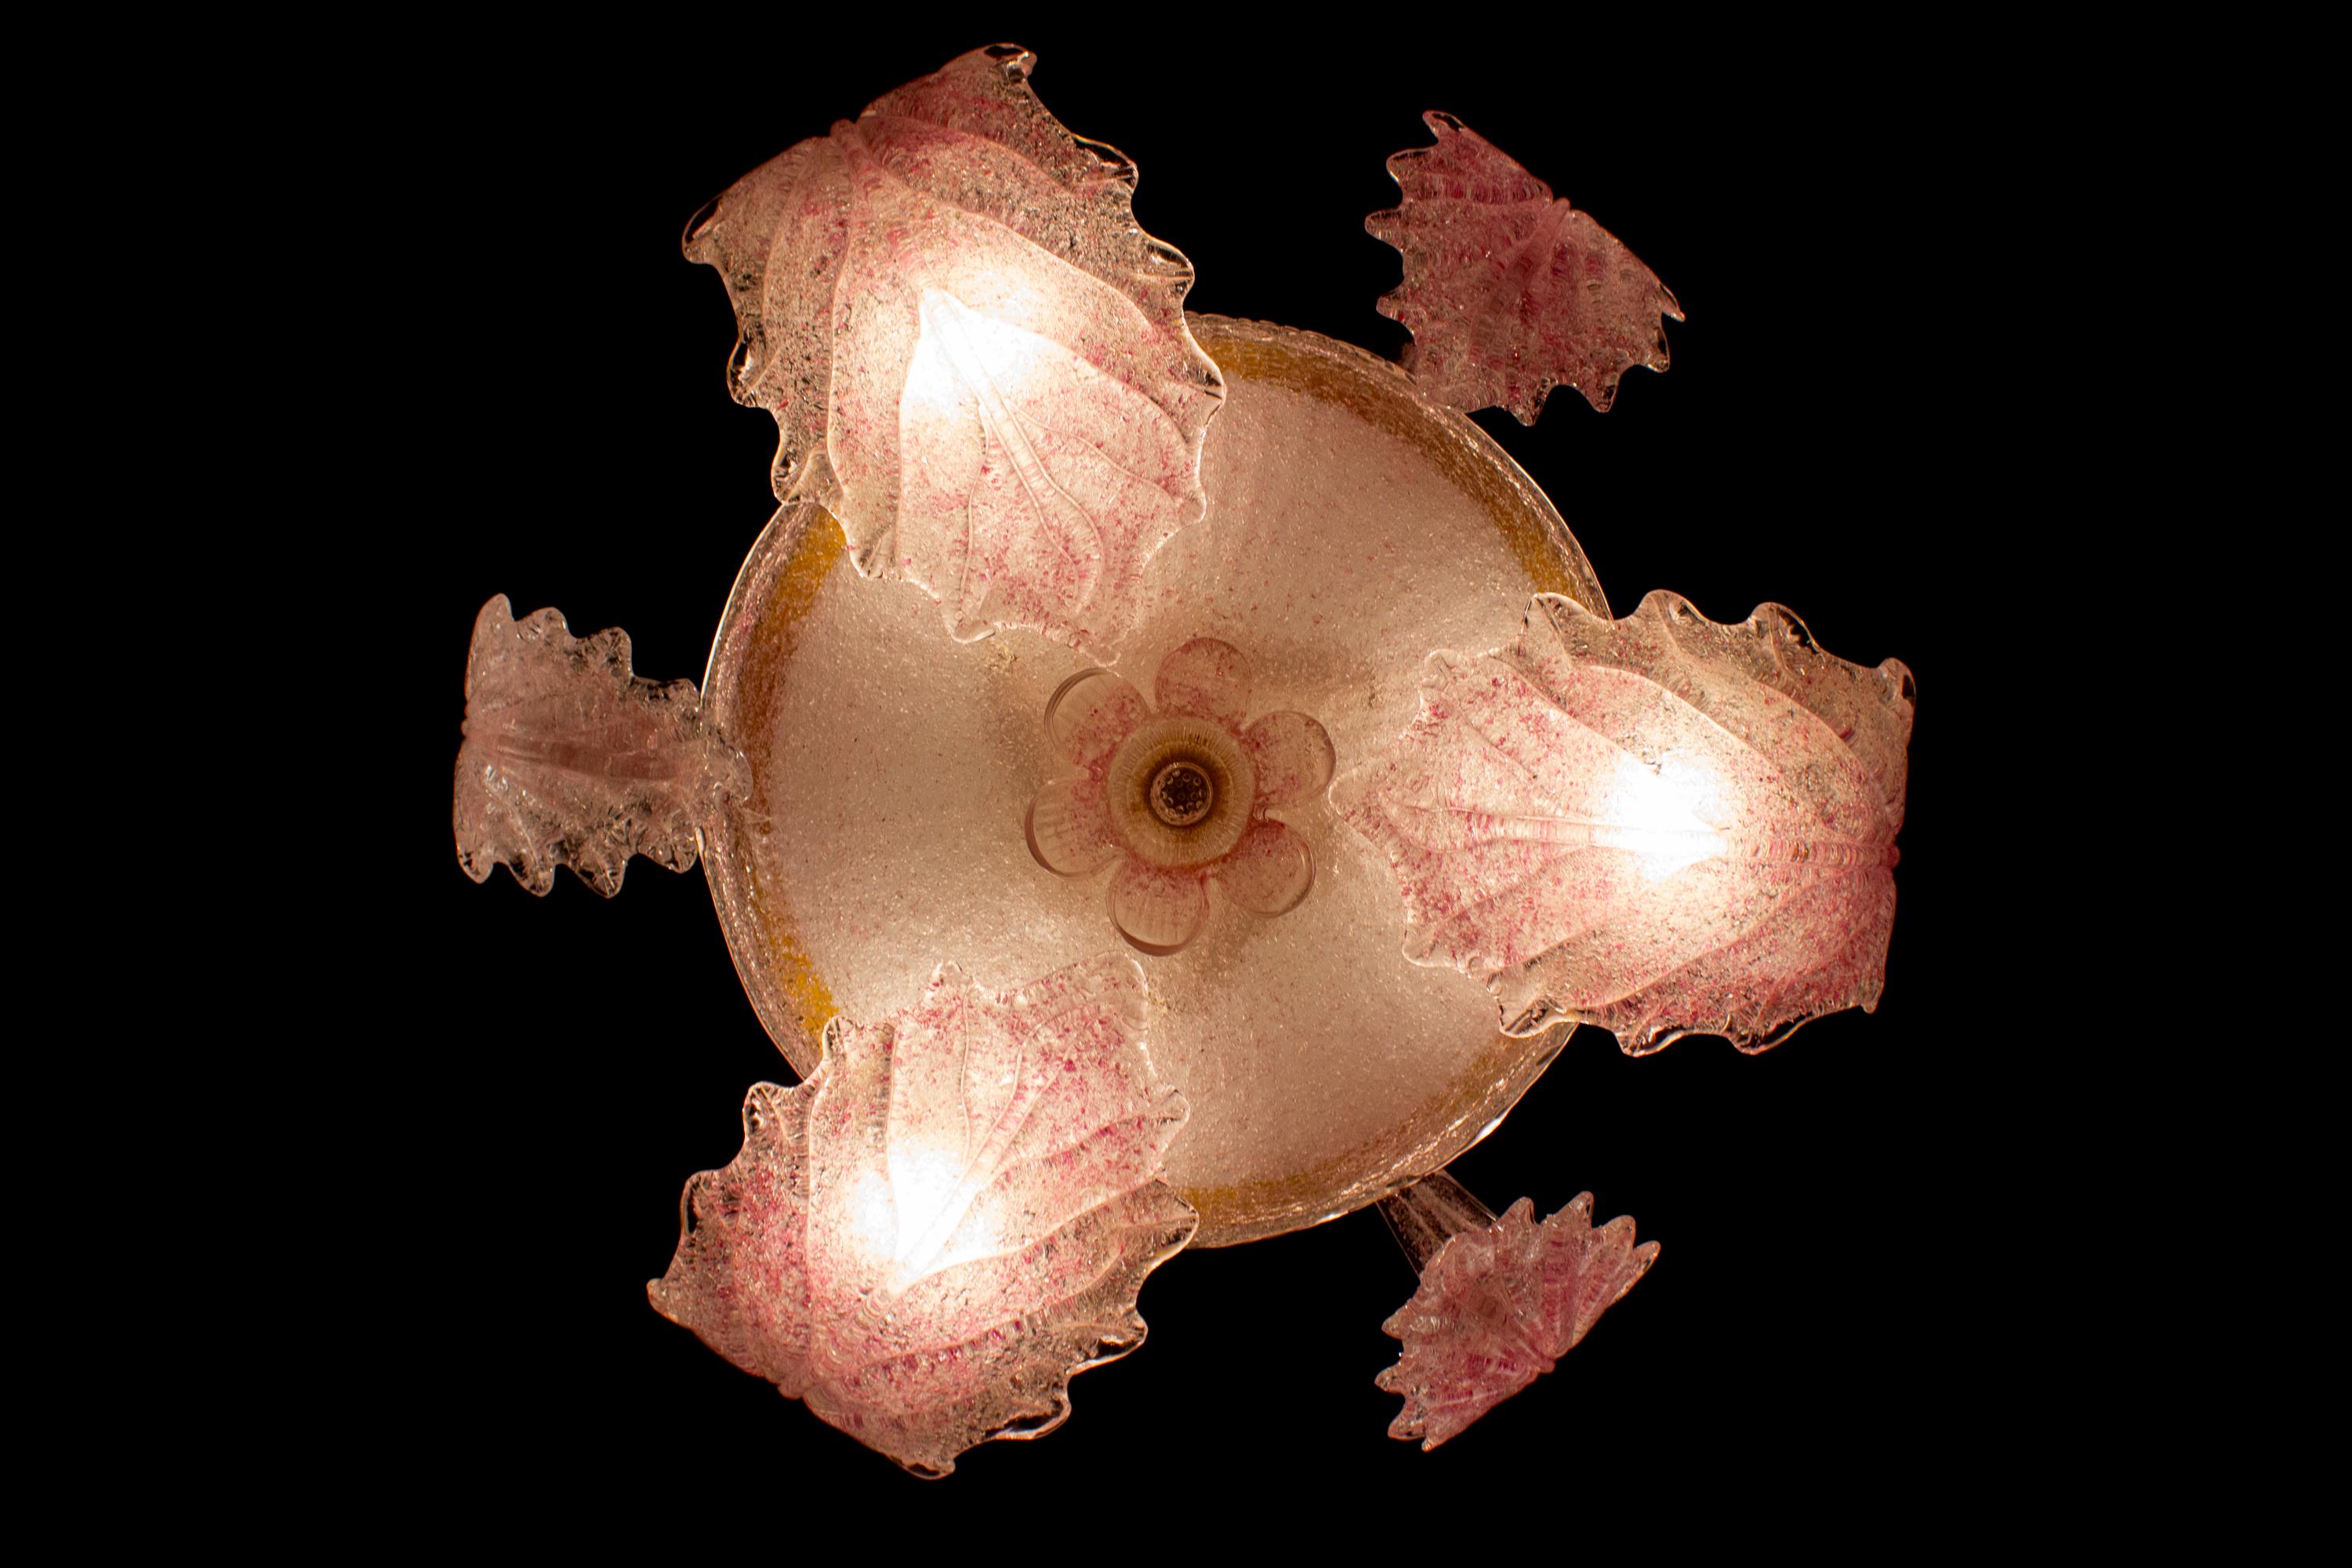 Art Deco Pink Ninfea Murano Glass Chandelier by Barovier Italy, 1940 For Sale 2